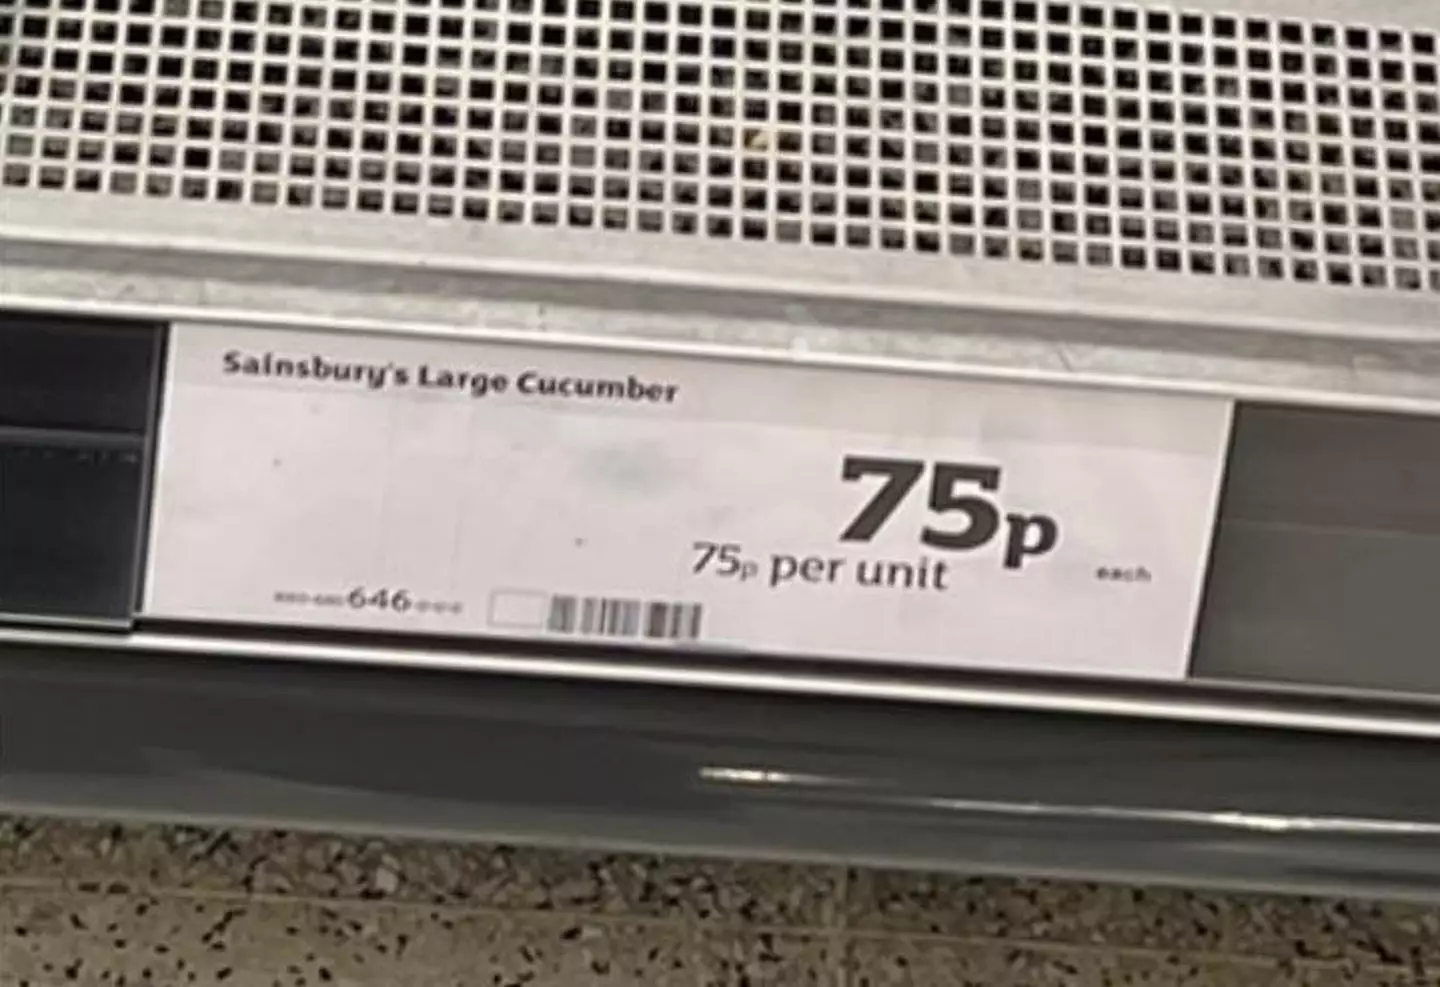 The large cucumber costs 75p (